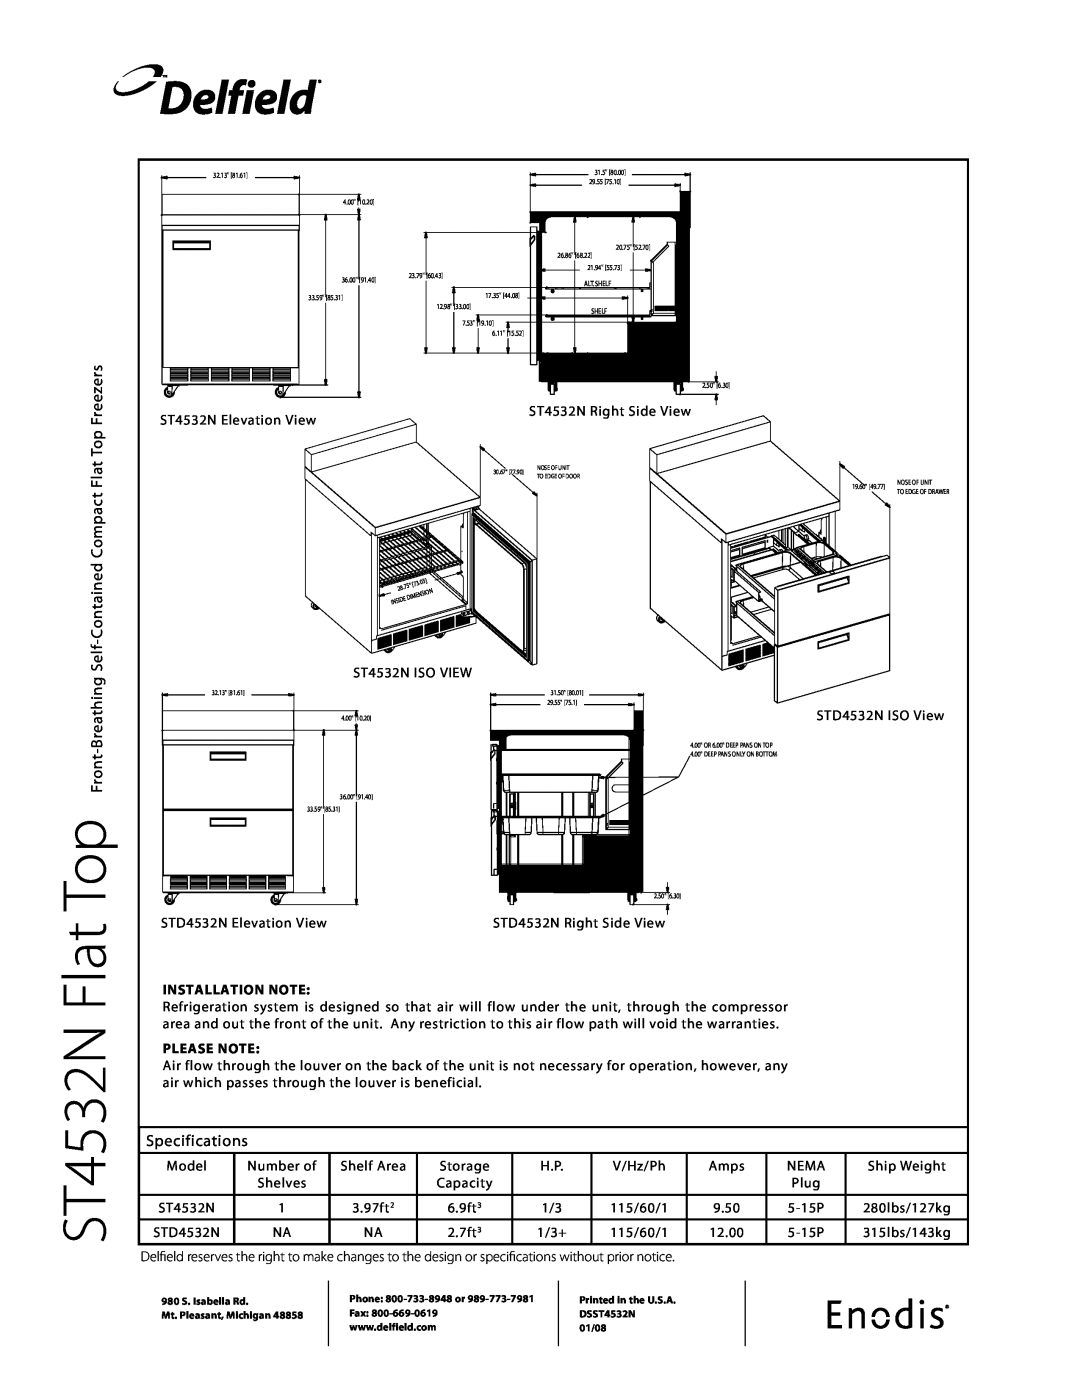 Delfield STD4532N Self-ContainedCompact Flat Top Freezers, Specifications, Delfield, ST4532N Flat Top Front-Breathing 